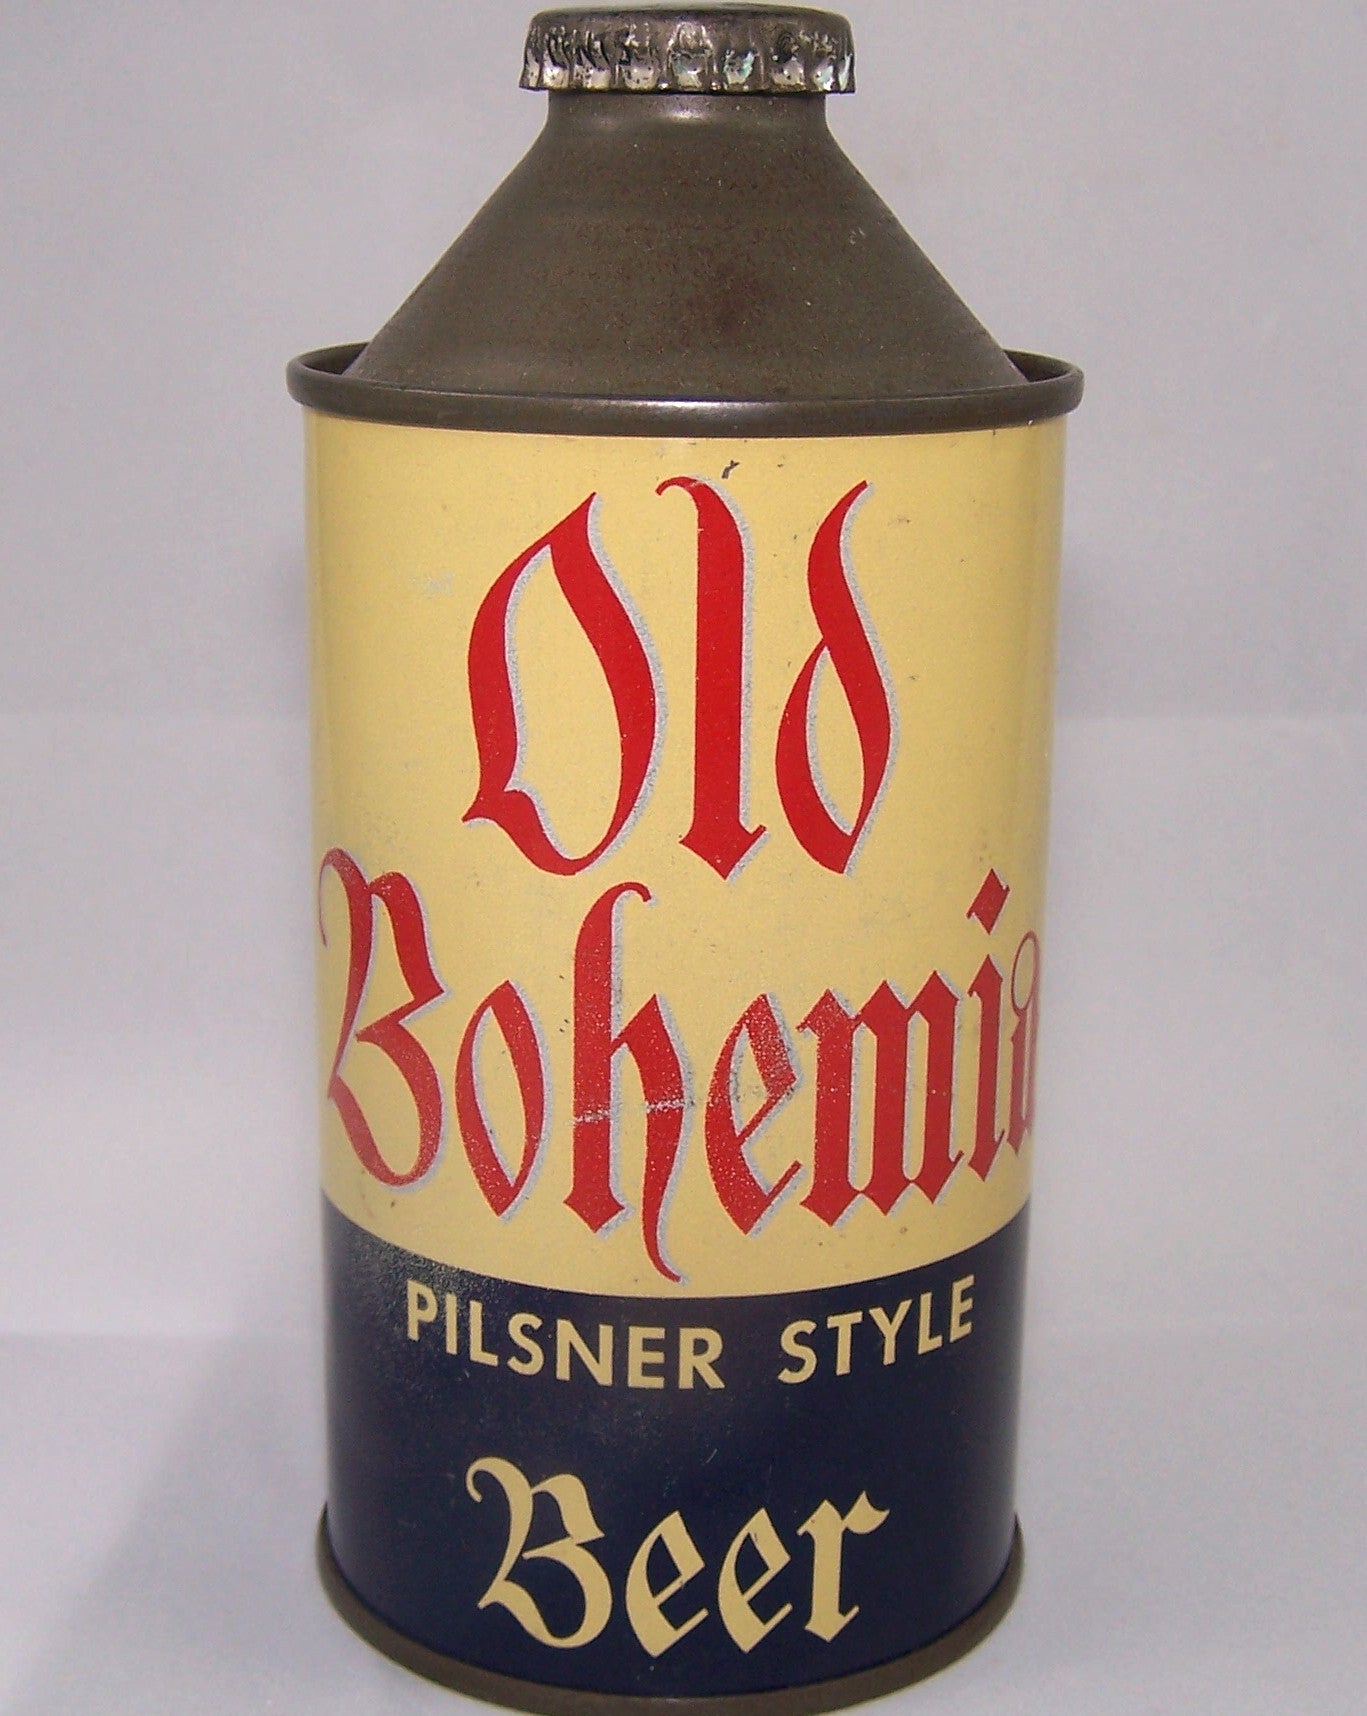 Old Bohemia Pilsner Style Beer, USBC 175-29, Grade 1/1- Sold on 08/29/18